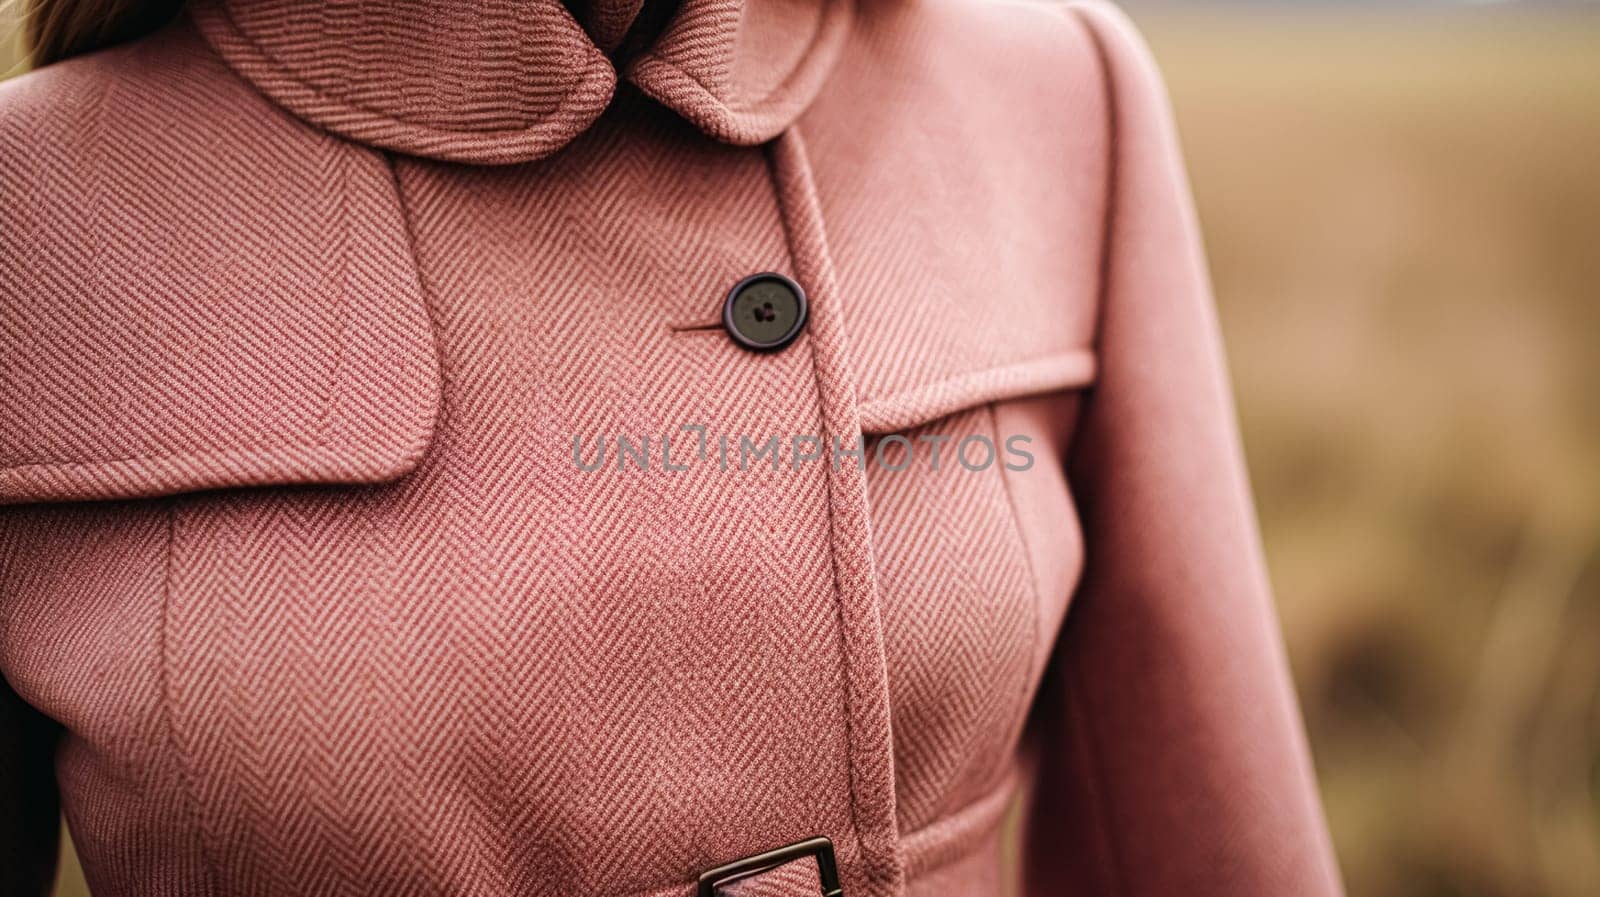 Womenswear autumn winter clothing and accessory collection in the English countryside fashion style, classic look by Anneleven